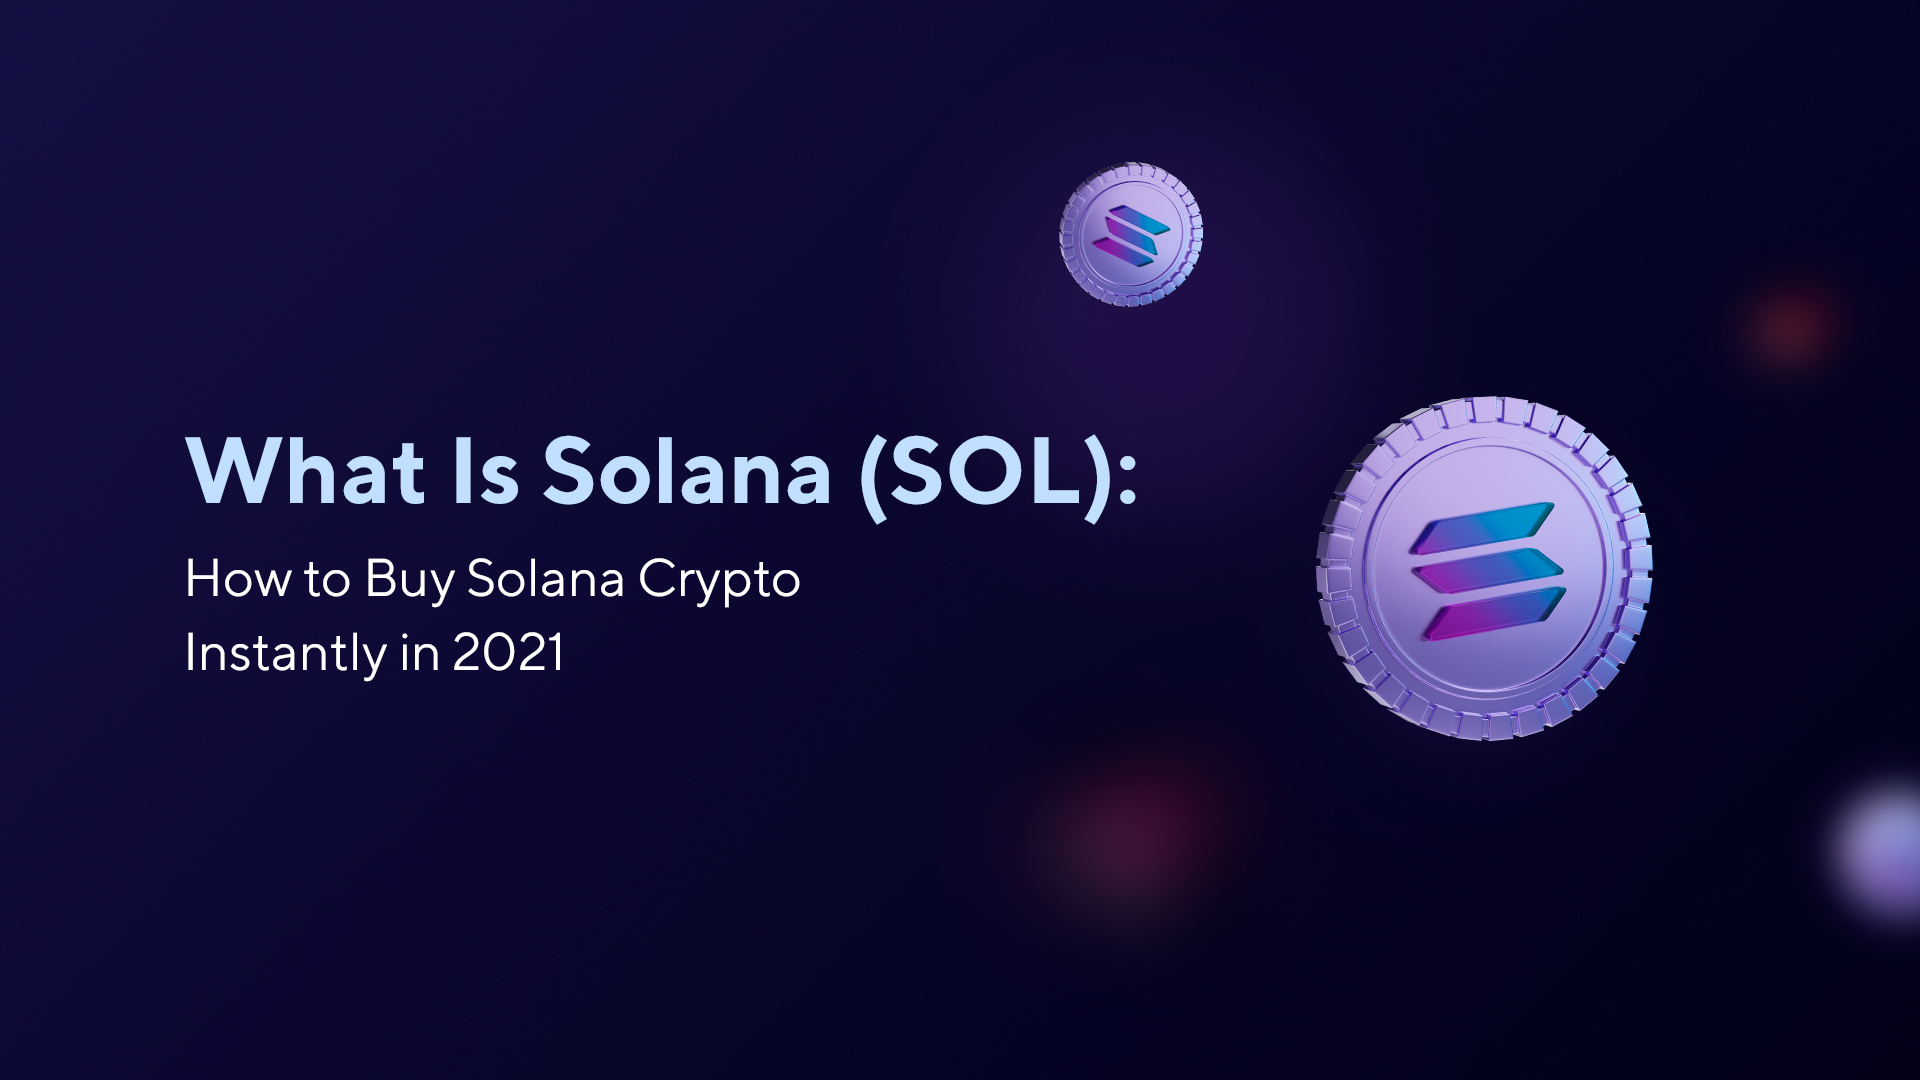 What Is Solana (SOL): How to Buy Solana Crypto Instantly in 2021